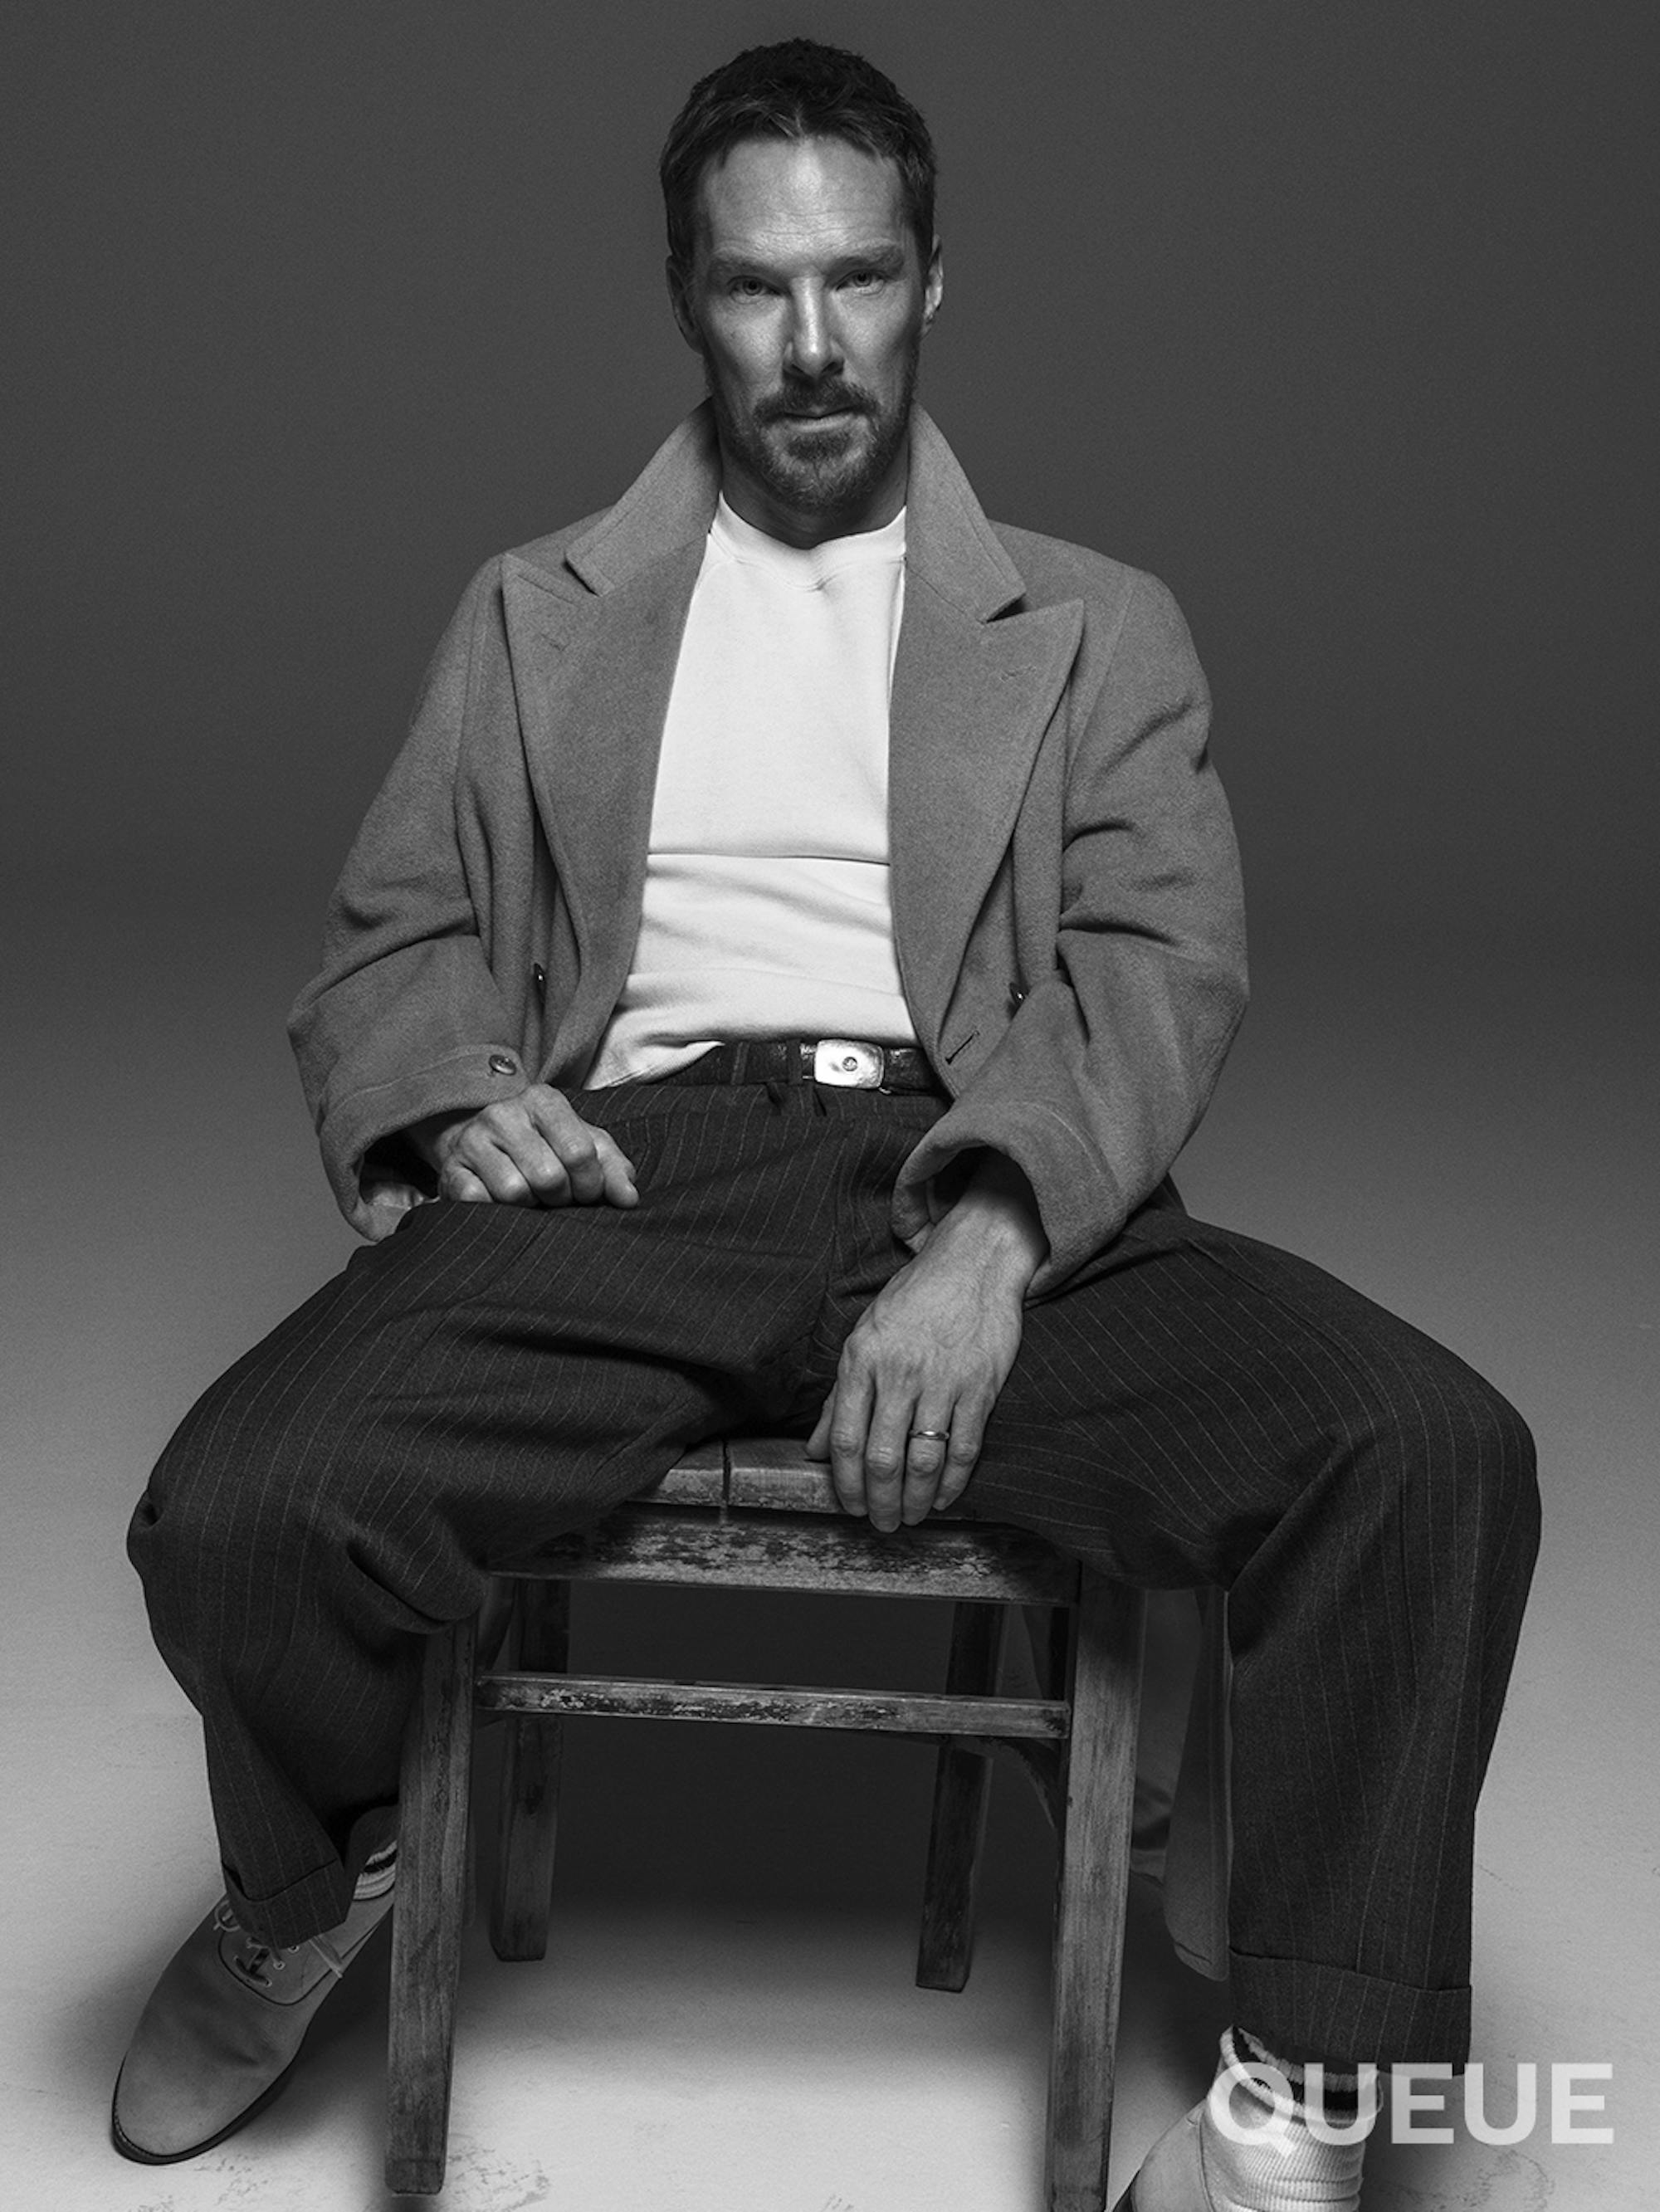 Benedict Cumberbatch wears dark pants, a white shirt, and a grey cardigan. He sits in a chair looking straight at the camera.